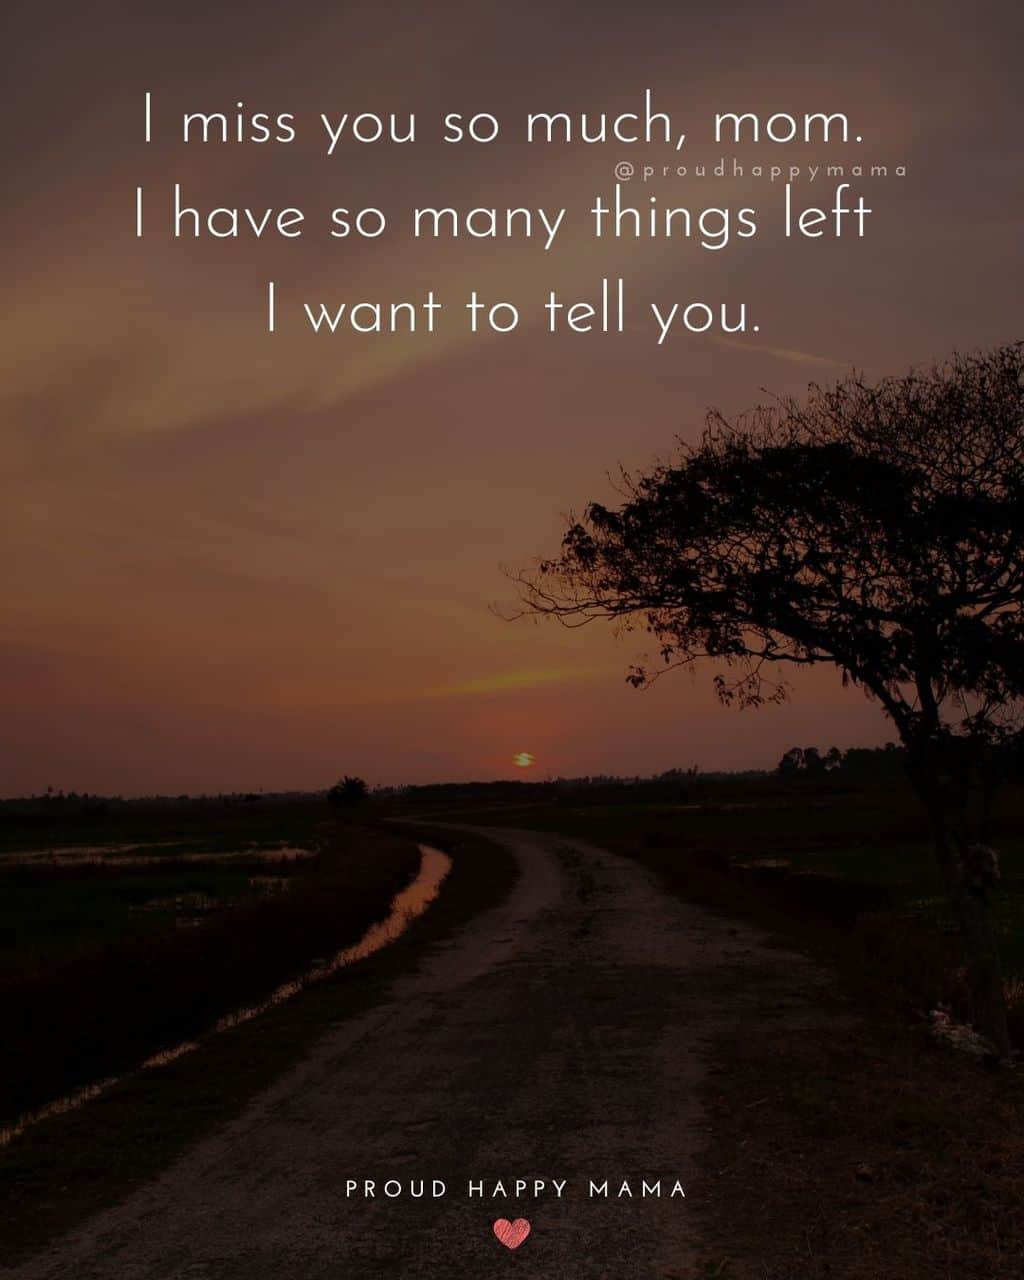 Sunset across road with rice fields with text overlay, ‘I miss you so much, mom. I have so many things left I want to tell you.’